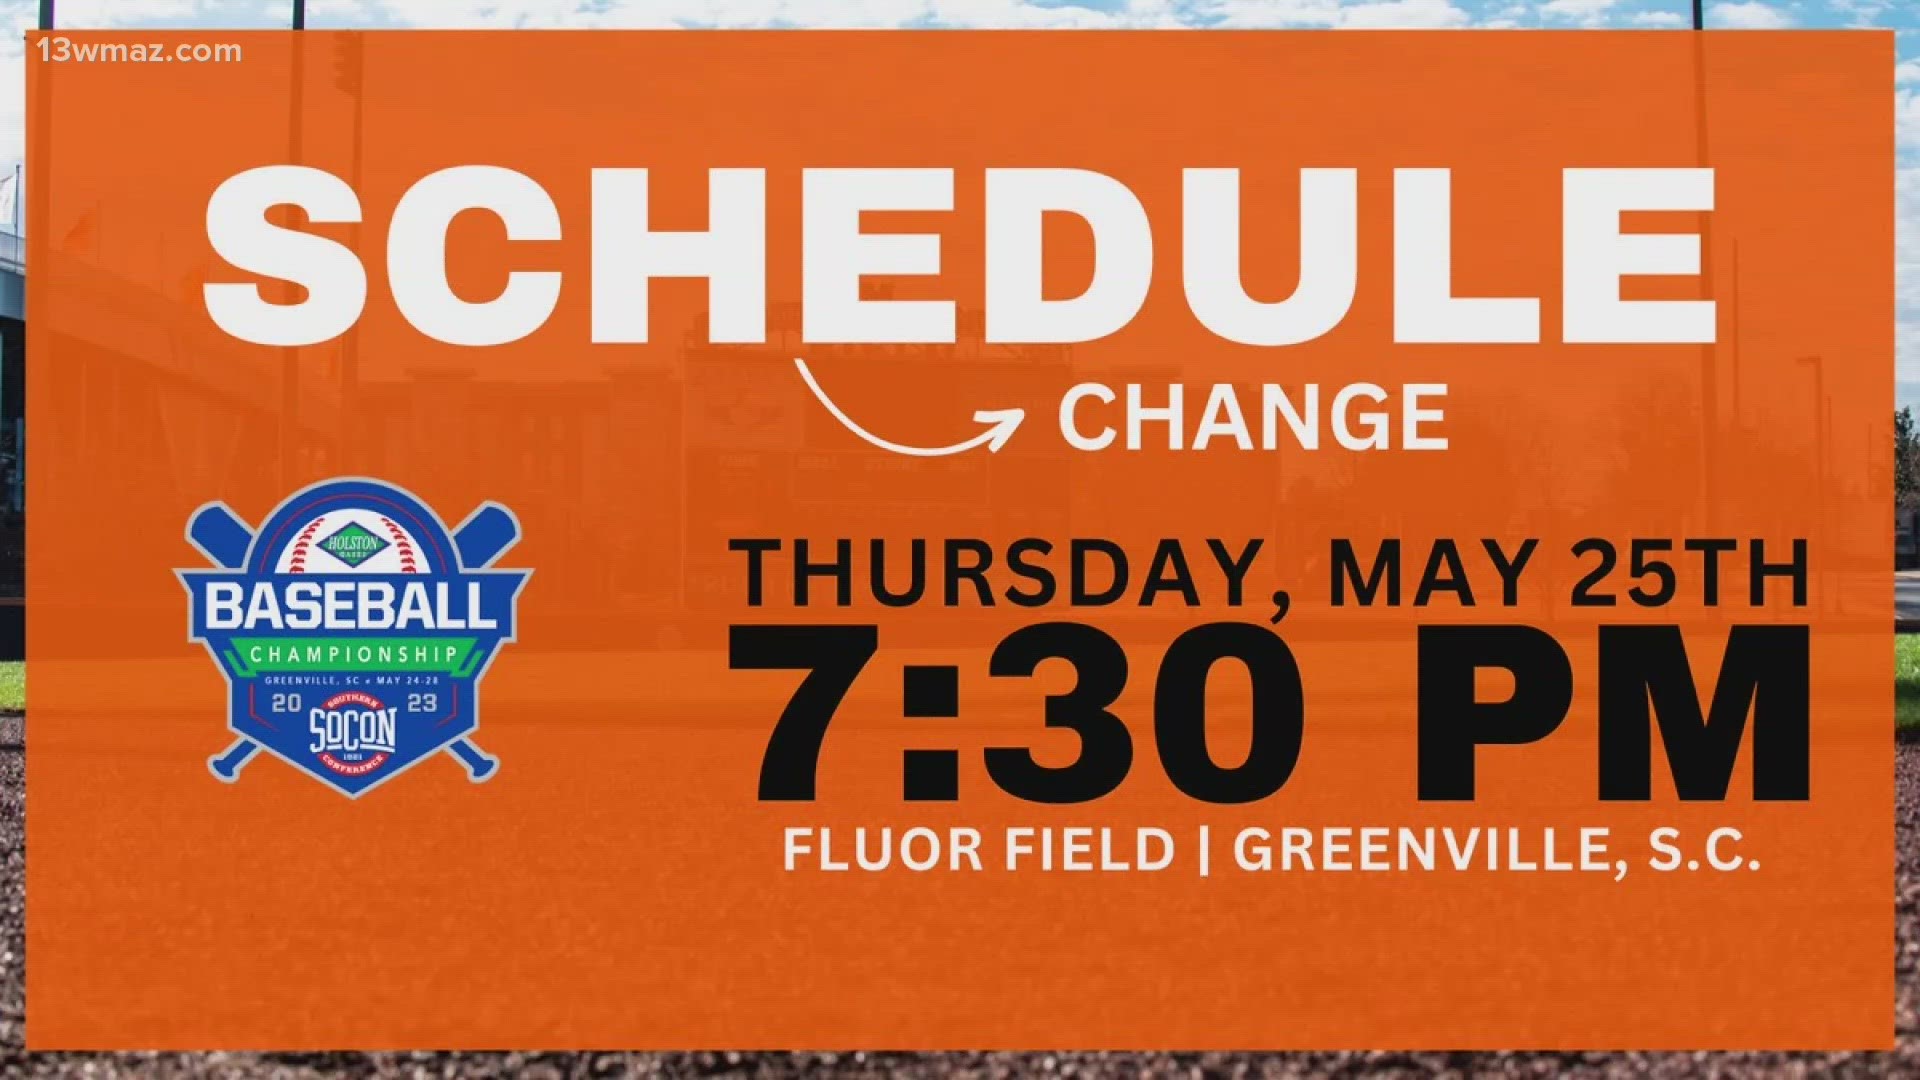 Mercer will now play its opening game in the Southern Conference Baseball Championship on Thursday at 7:30 p.m. at Fluor Field in Greenville, South Carolina